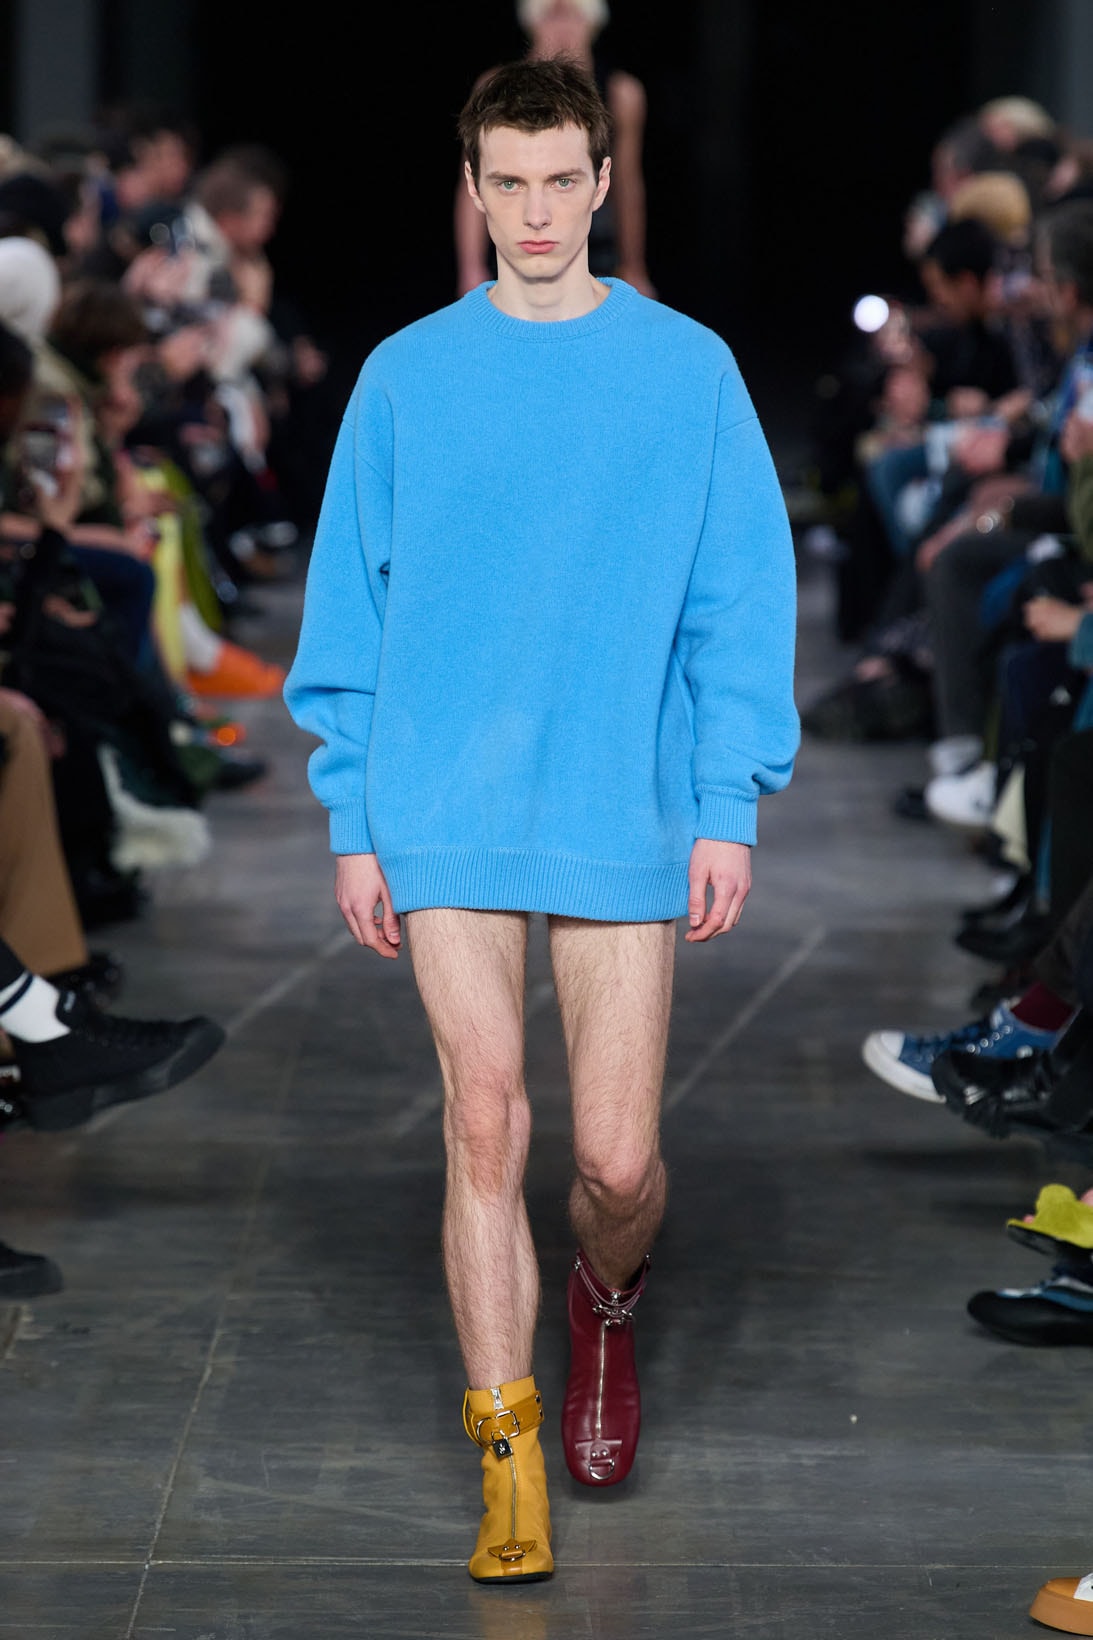 JW Anderson Pre-Fall Winter Milan Fashion Week Men's Runway Frog Wellipets Boots Images